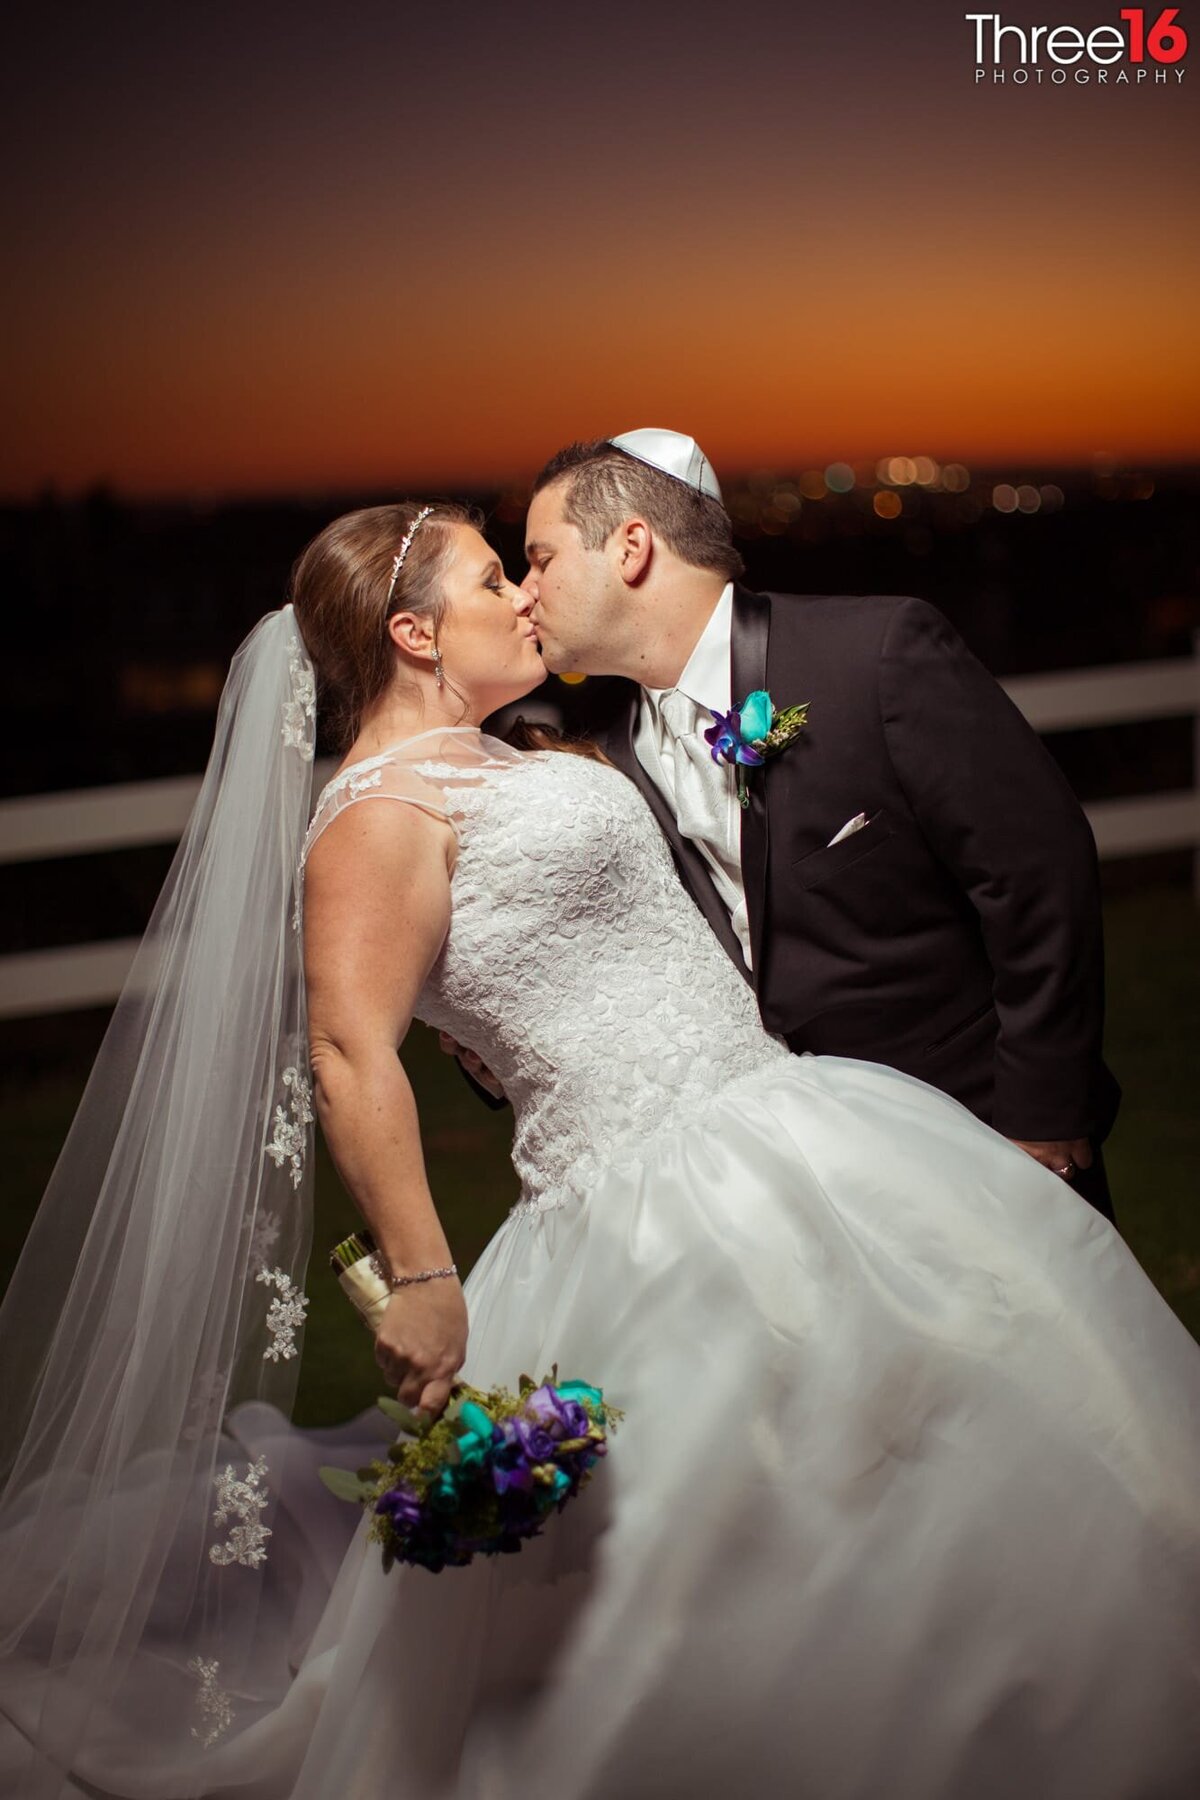 Groom dips and kisses his Bride during photo shoot just as the sun is setting